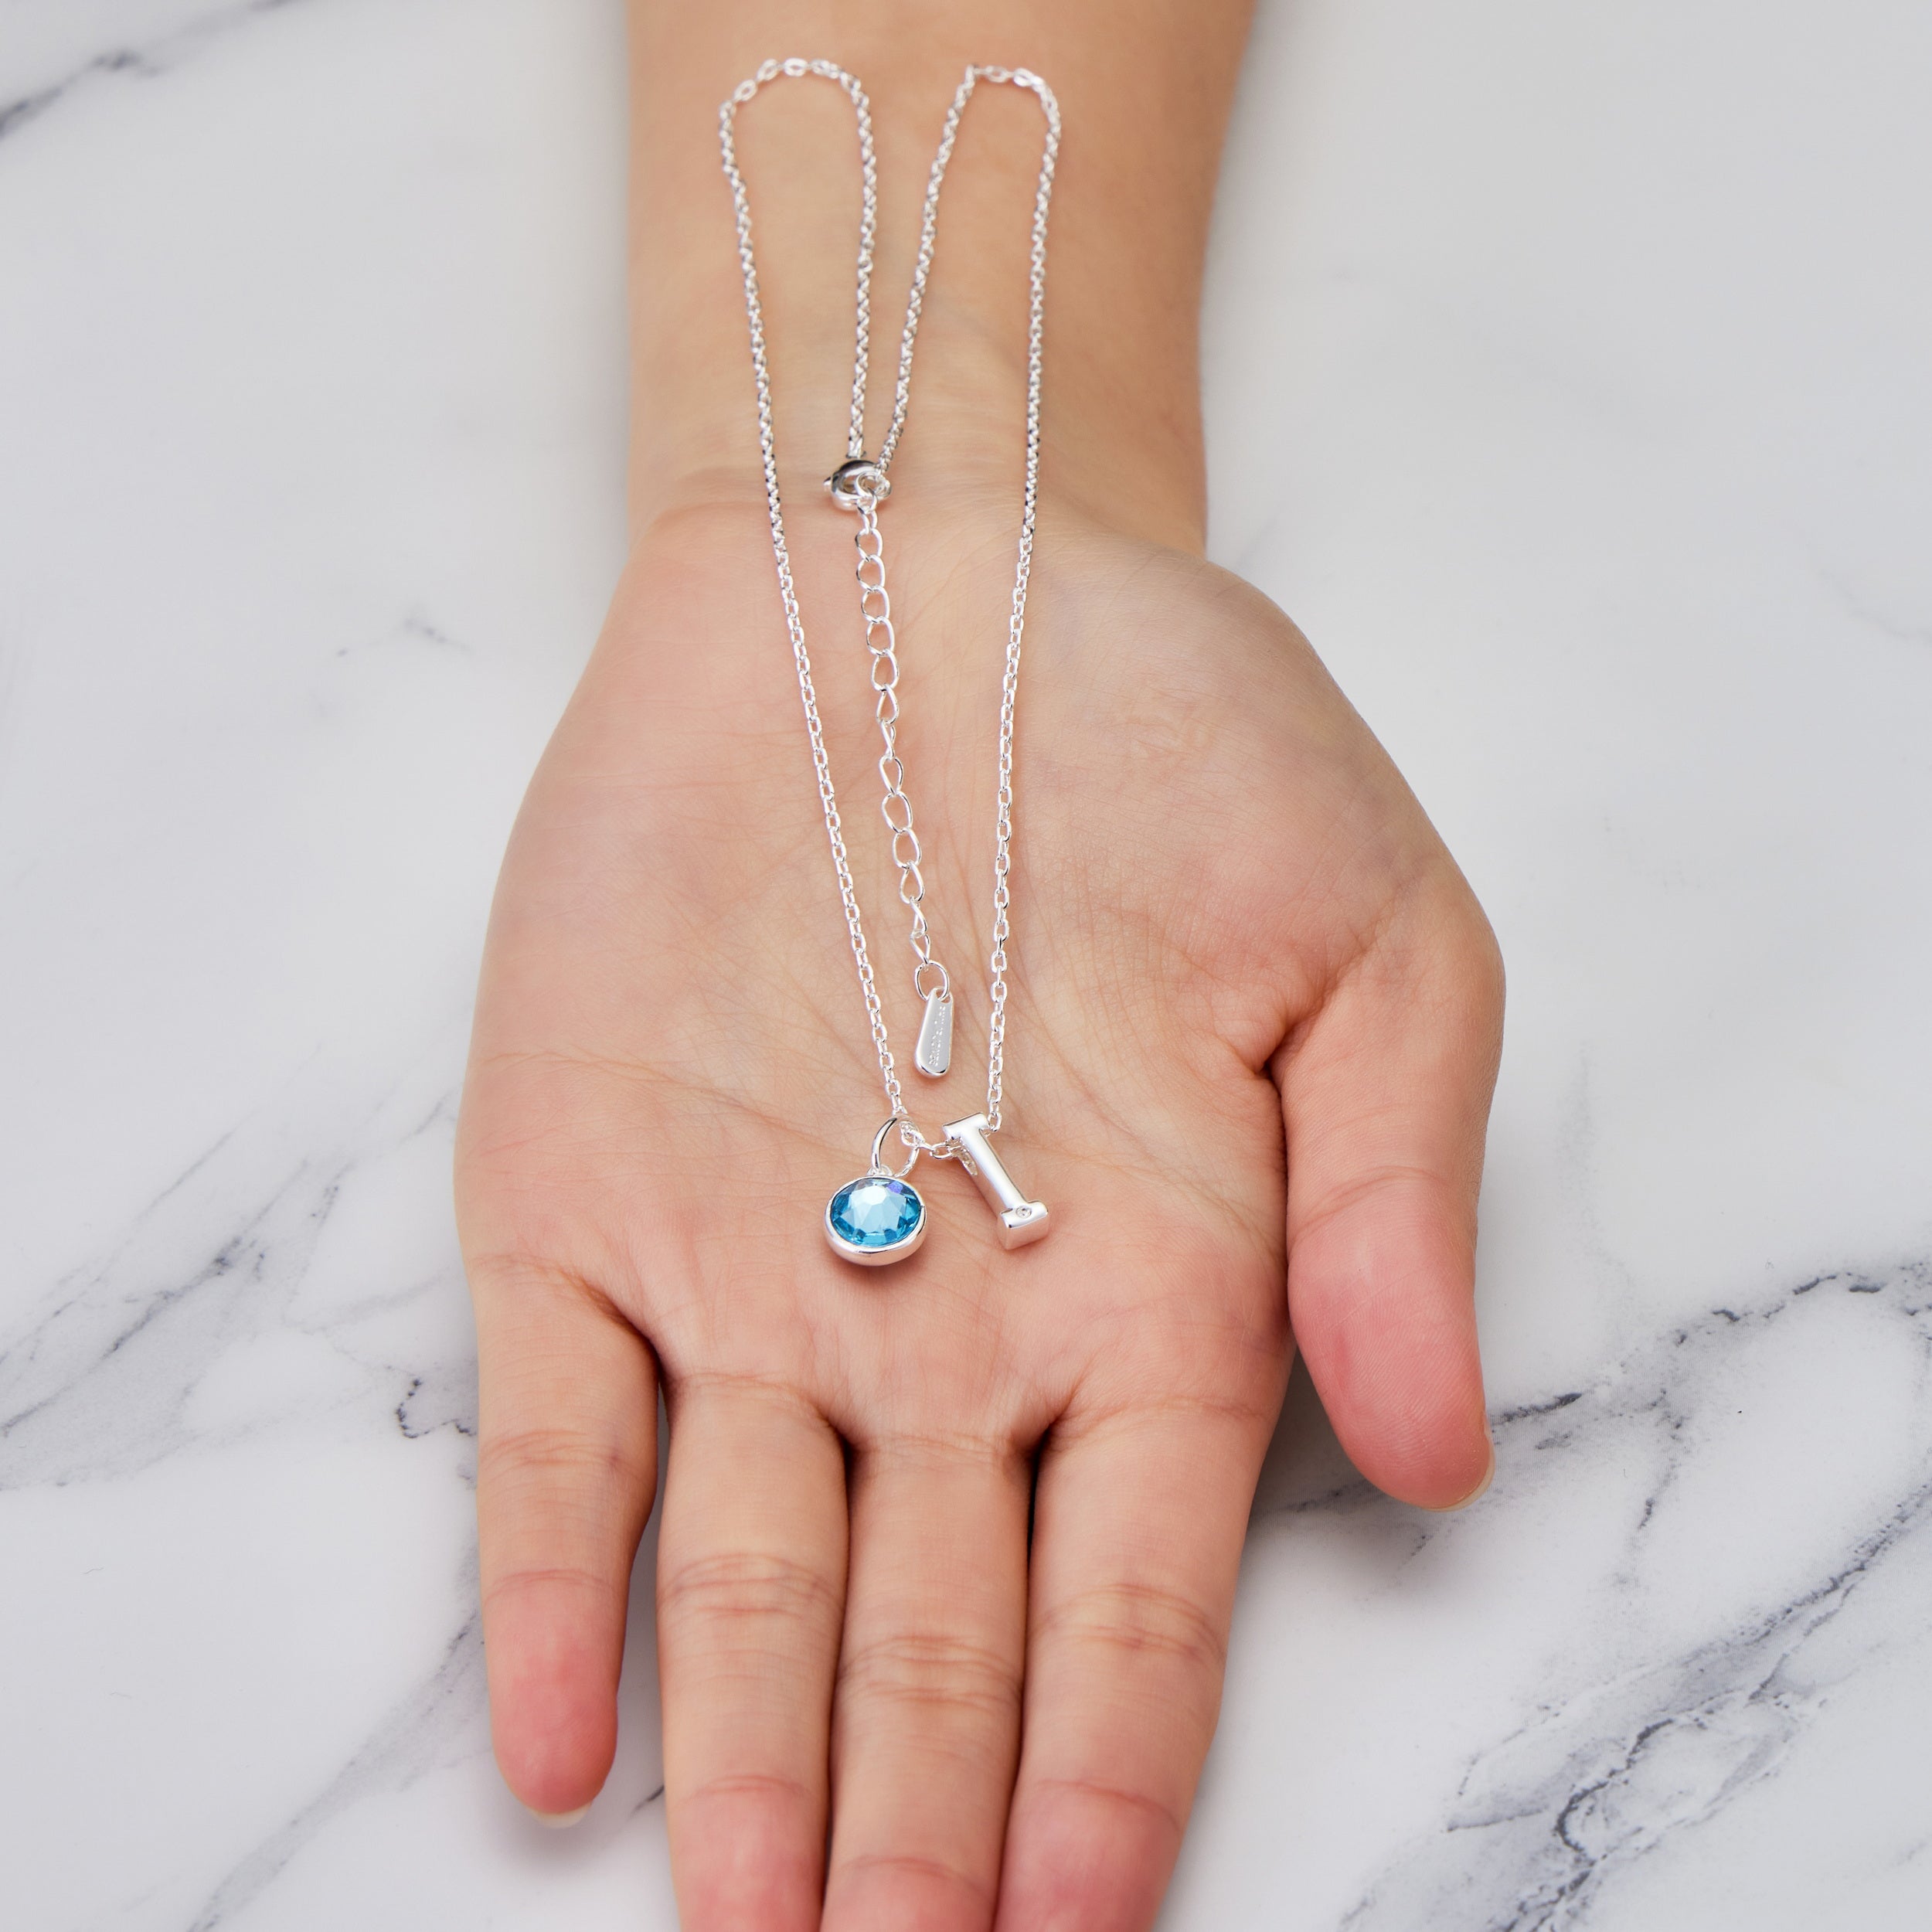 Initial I Necklace with Birthstone Charm Created with Zircondia® Crystals